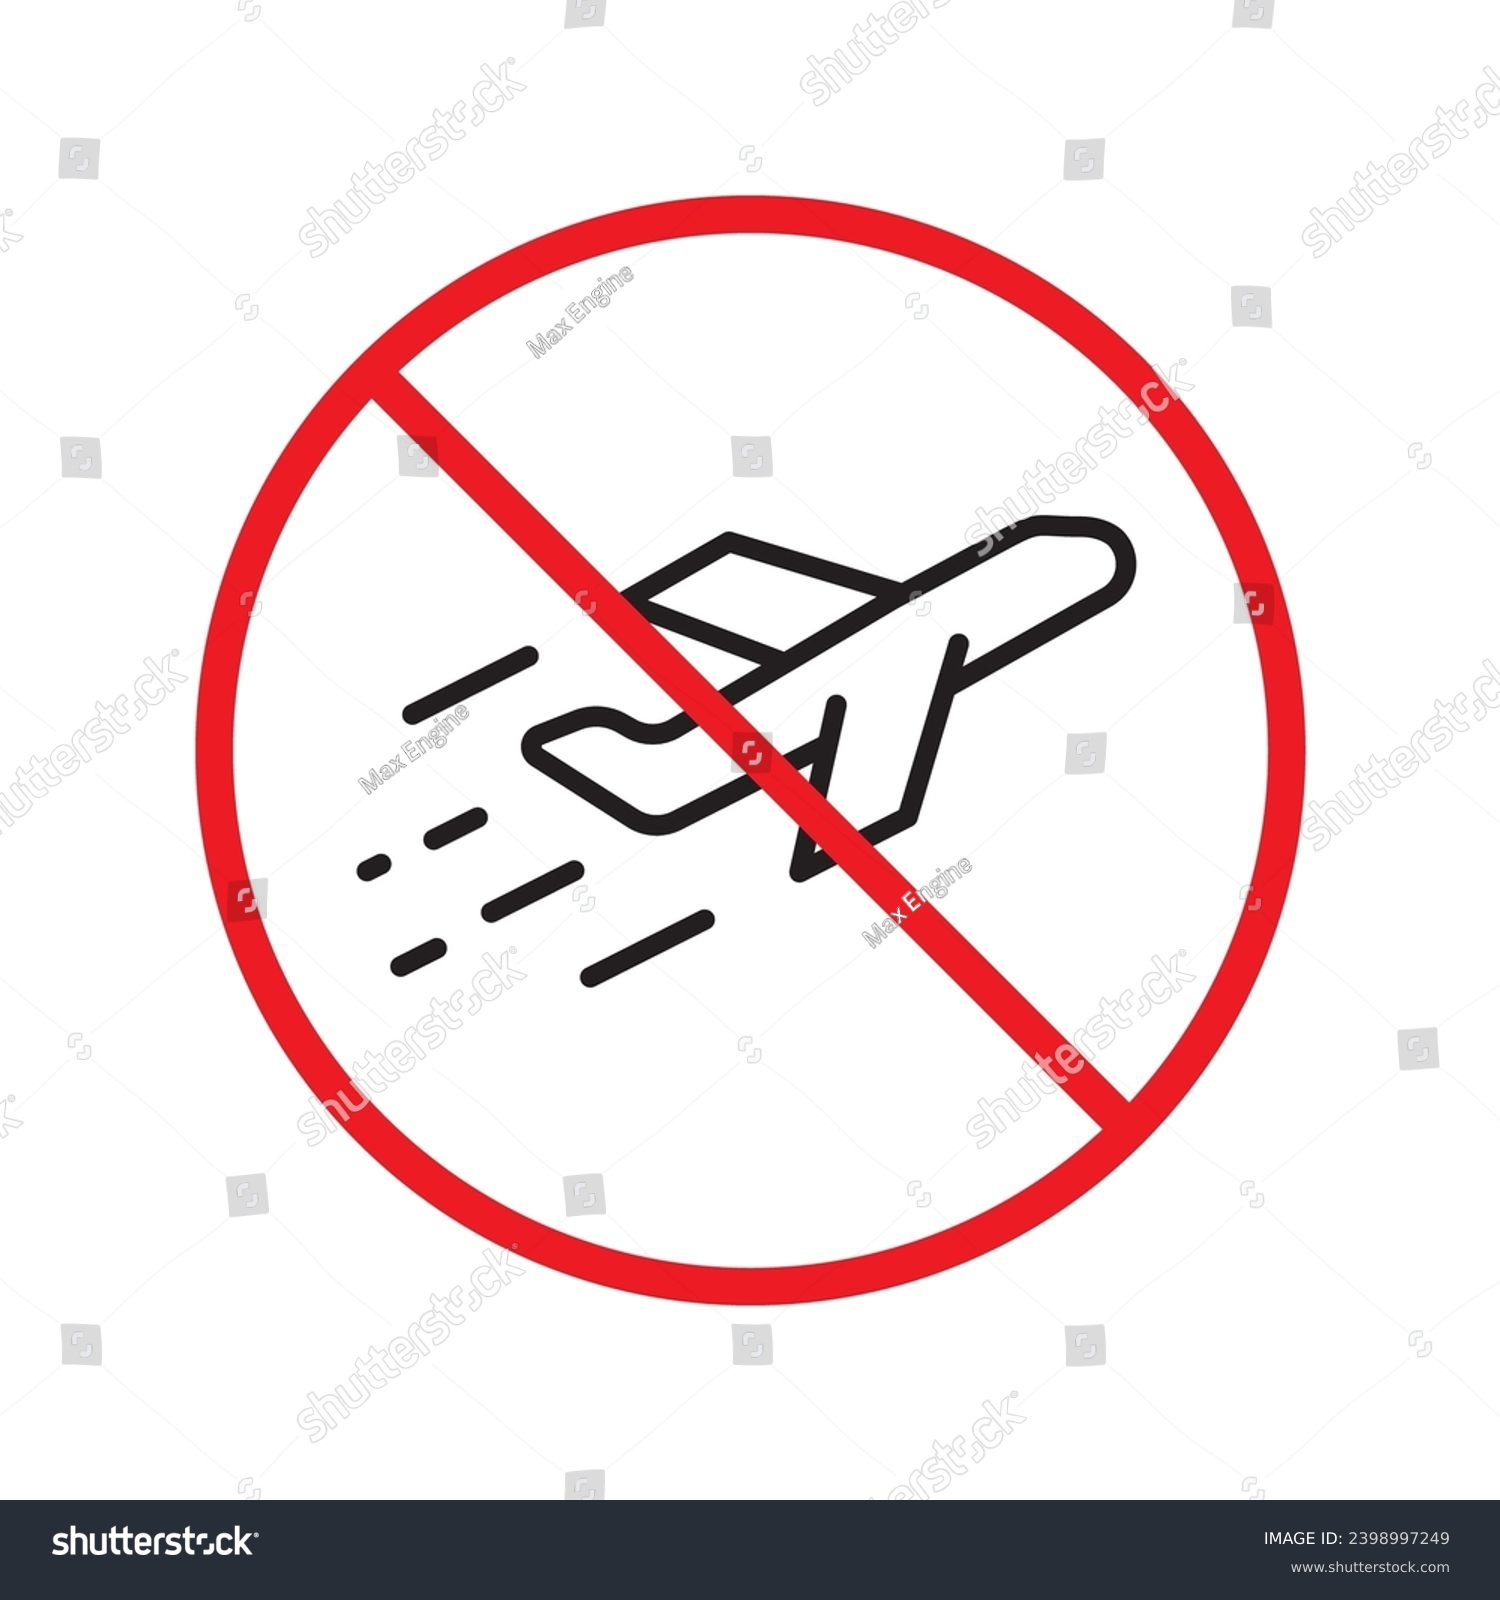 SVG of Airport icon. Plane vector icon. Airport sign design. Airport symbol pictogram. UX UI icon svg